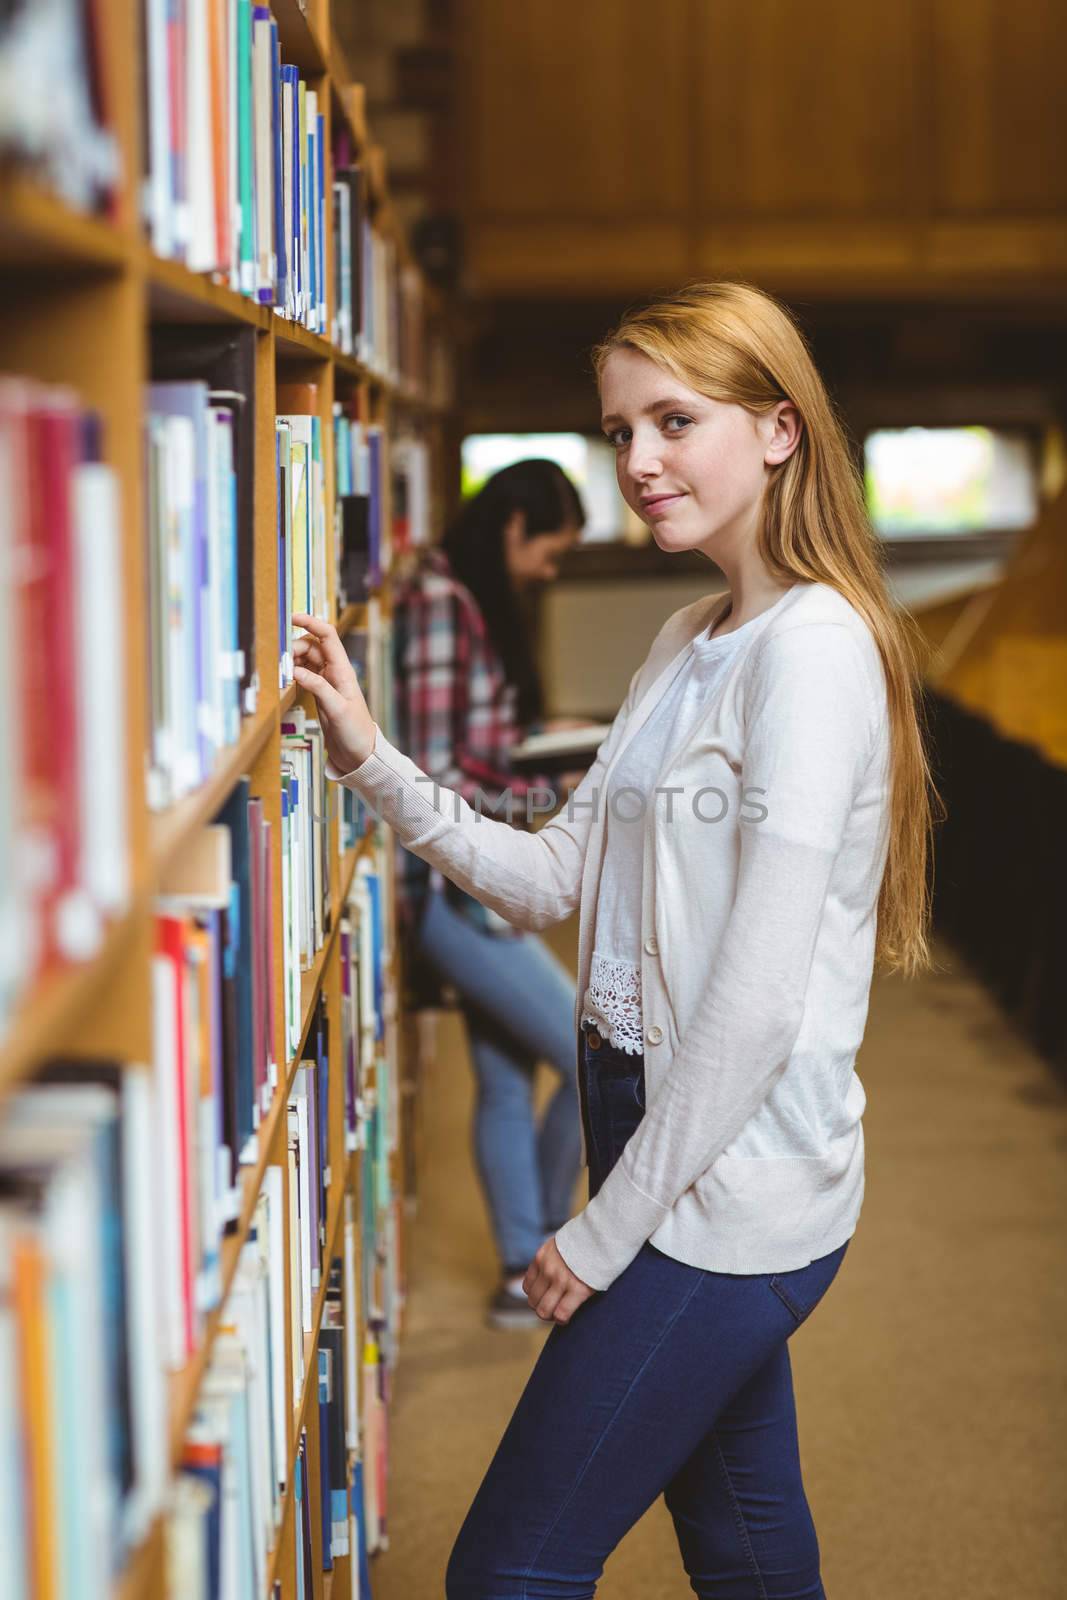 Blond student looking for book in library shelves by Wavebreakmedia